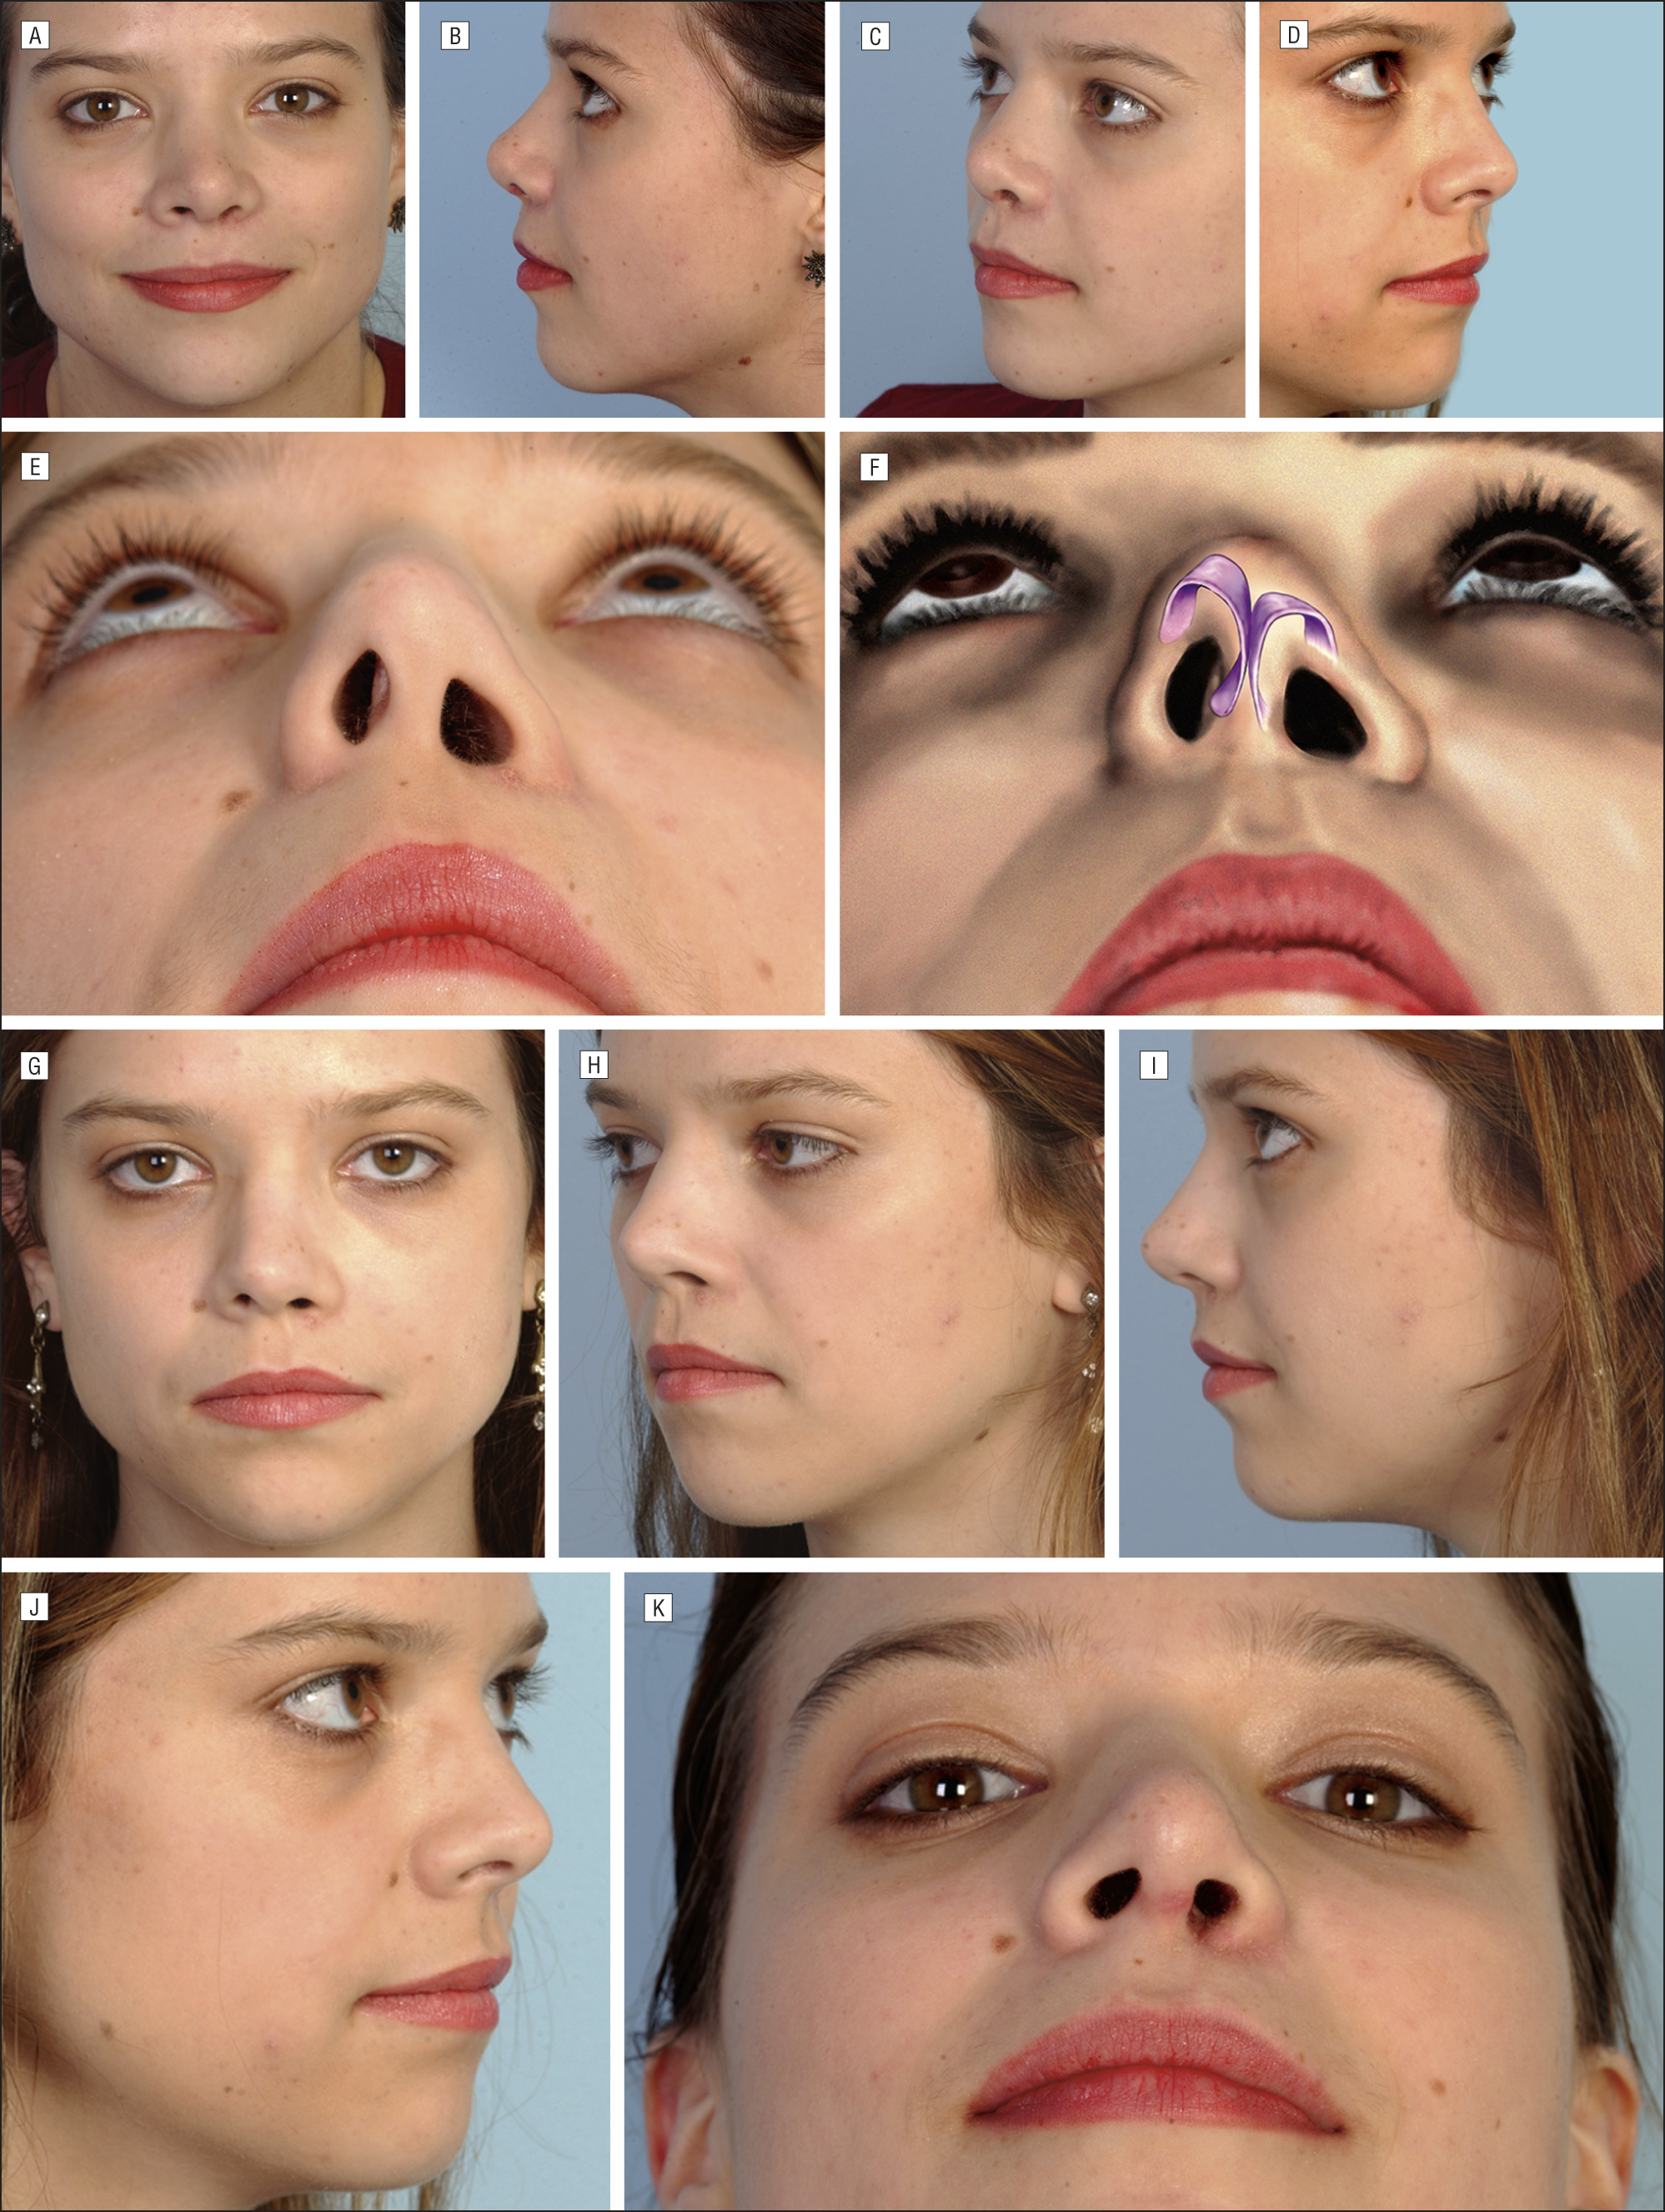 Craniofacial anomalies by ethnicity facial structure